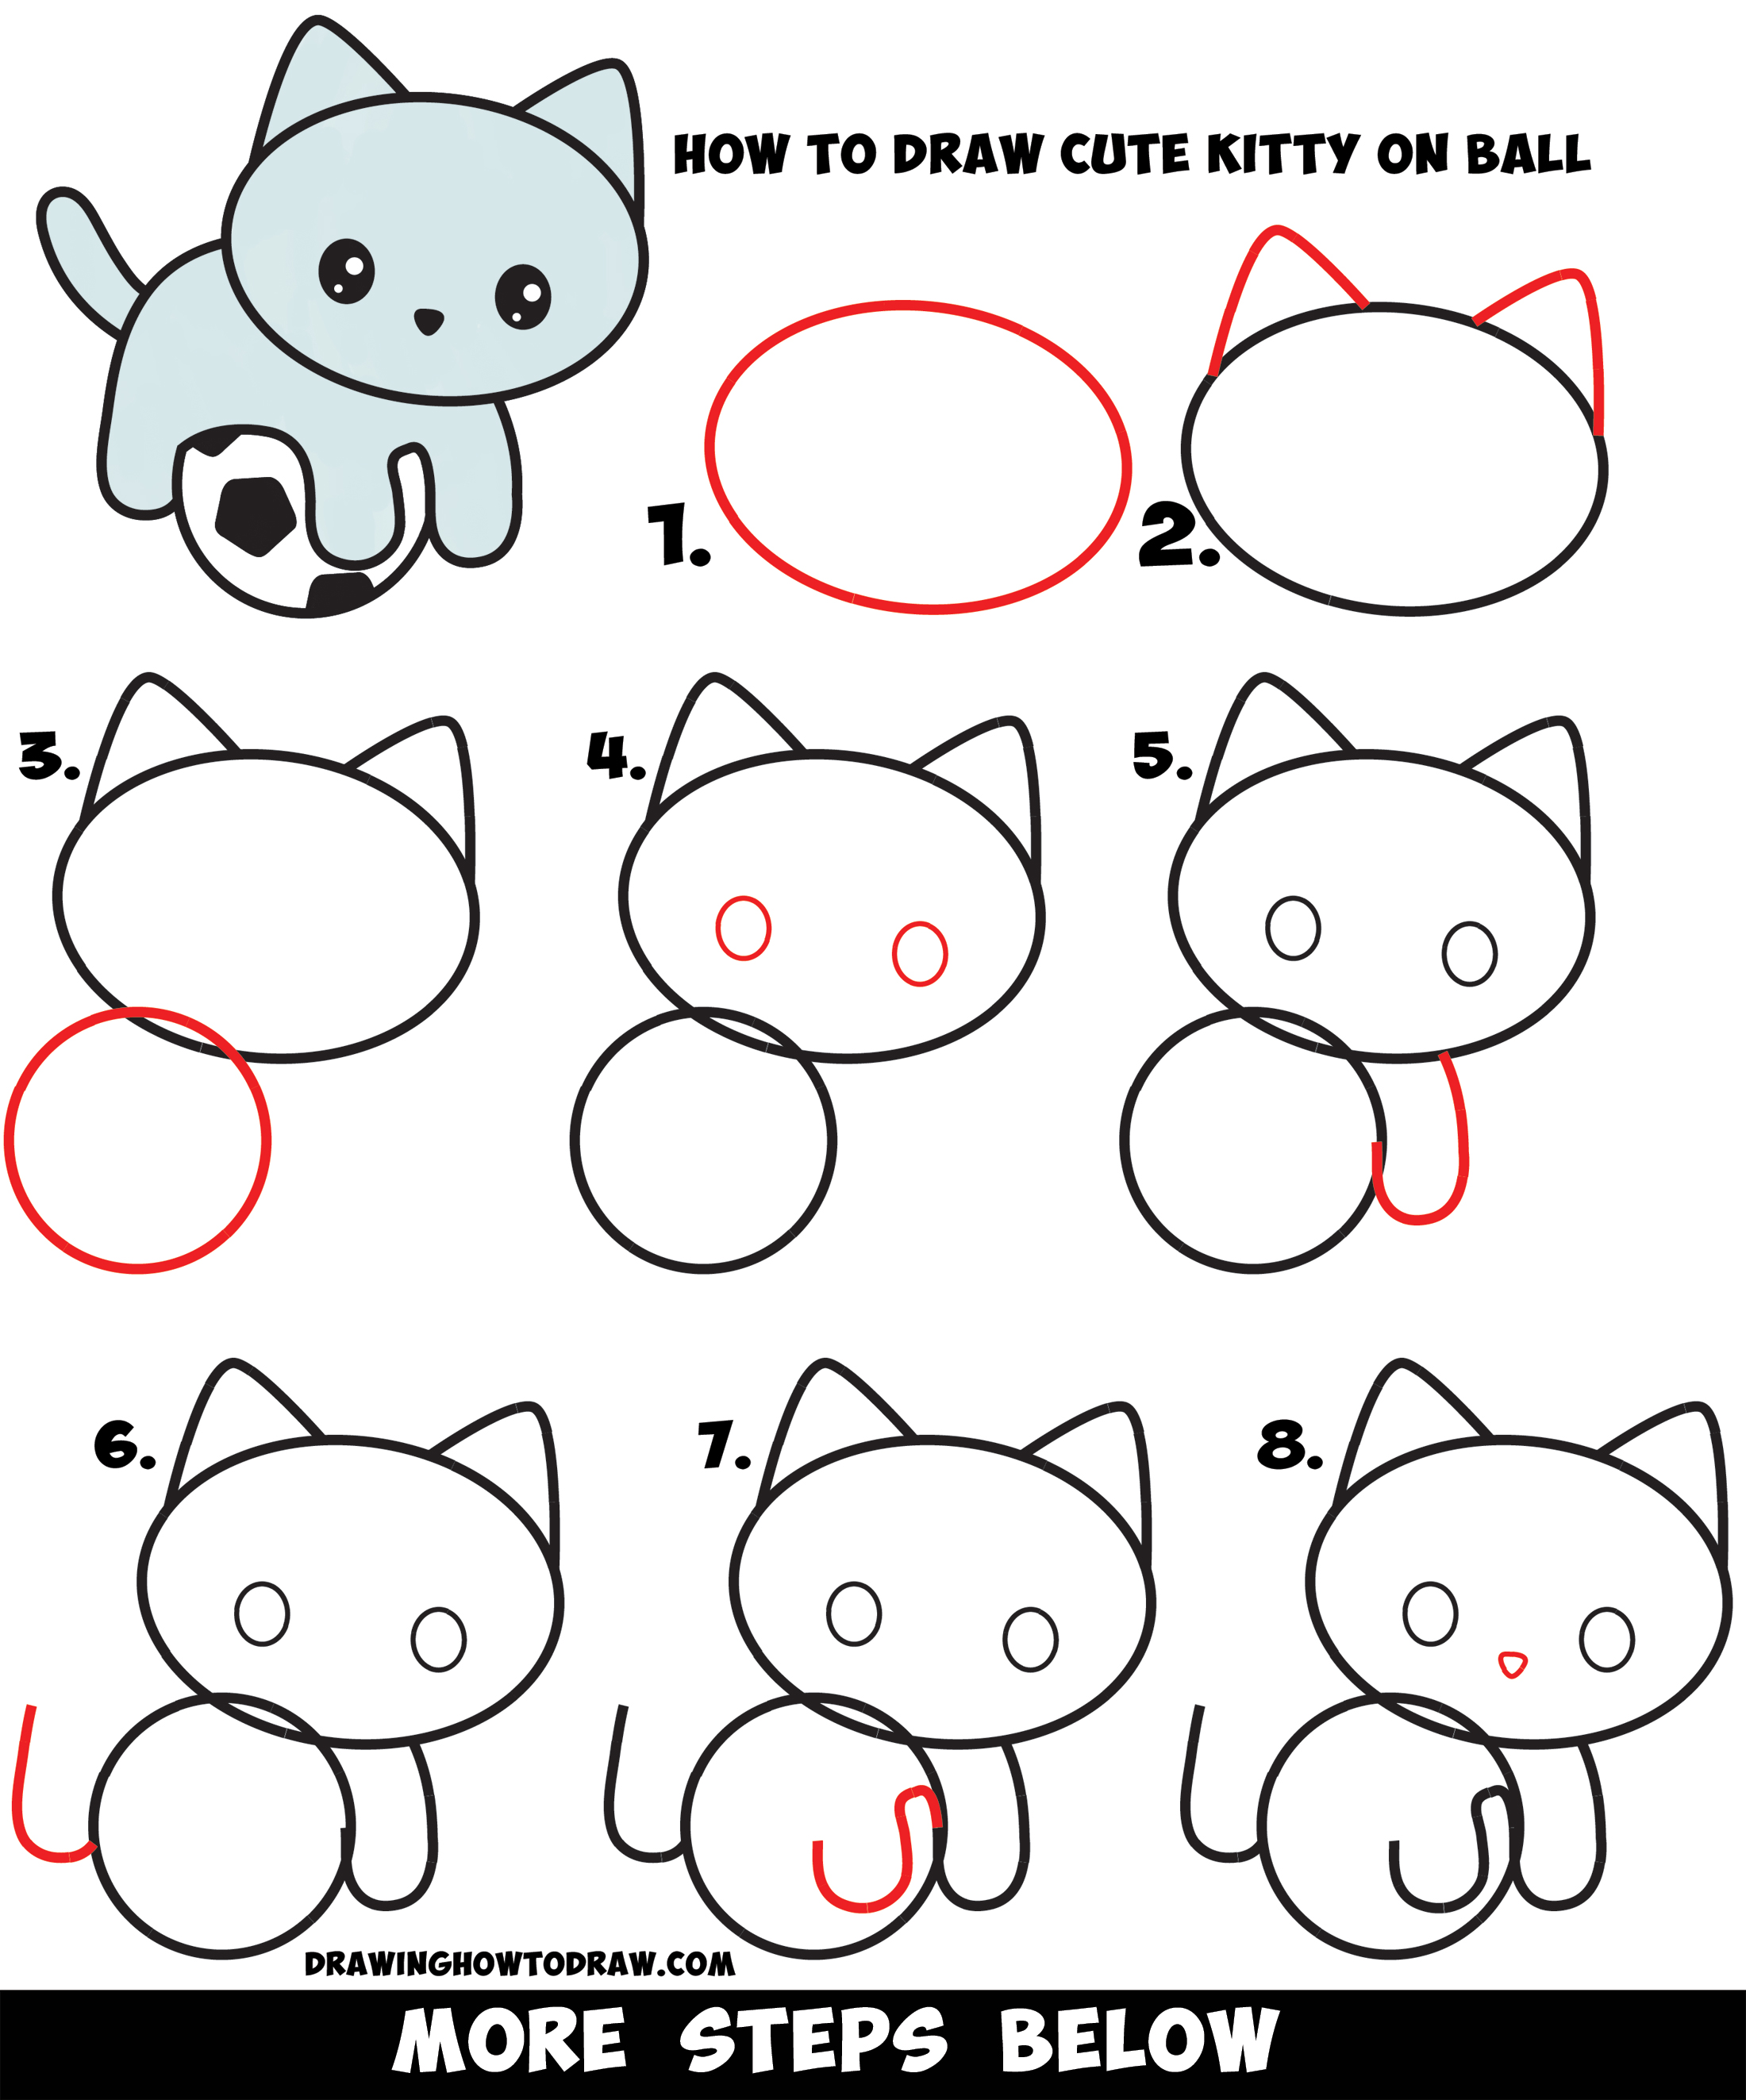 How to Draw a Cute Kitten Playing on a Soccer Ball Easy Step by Step ...